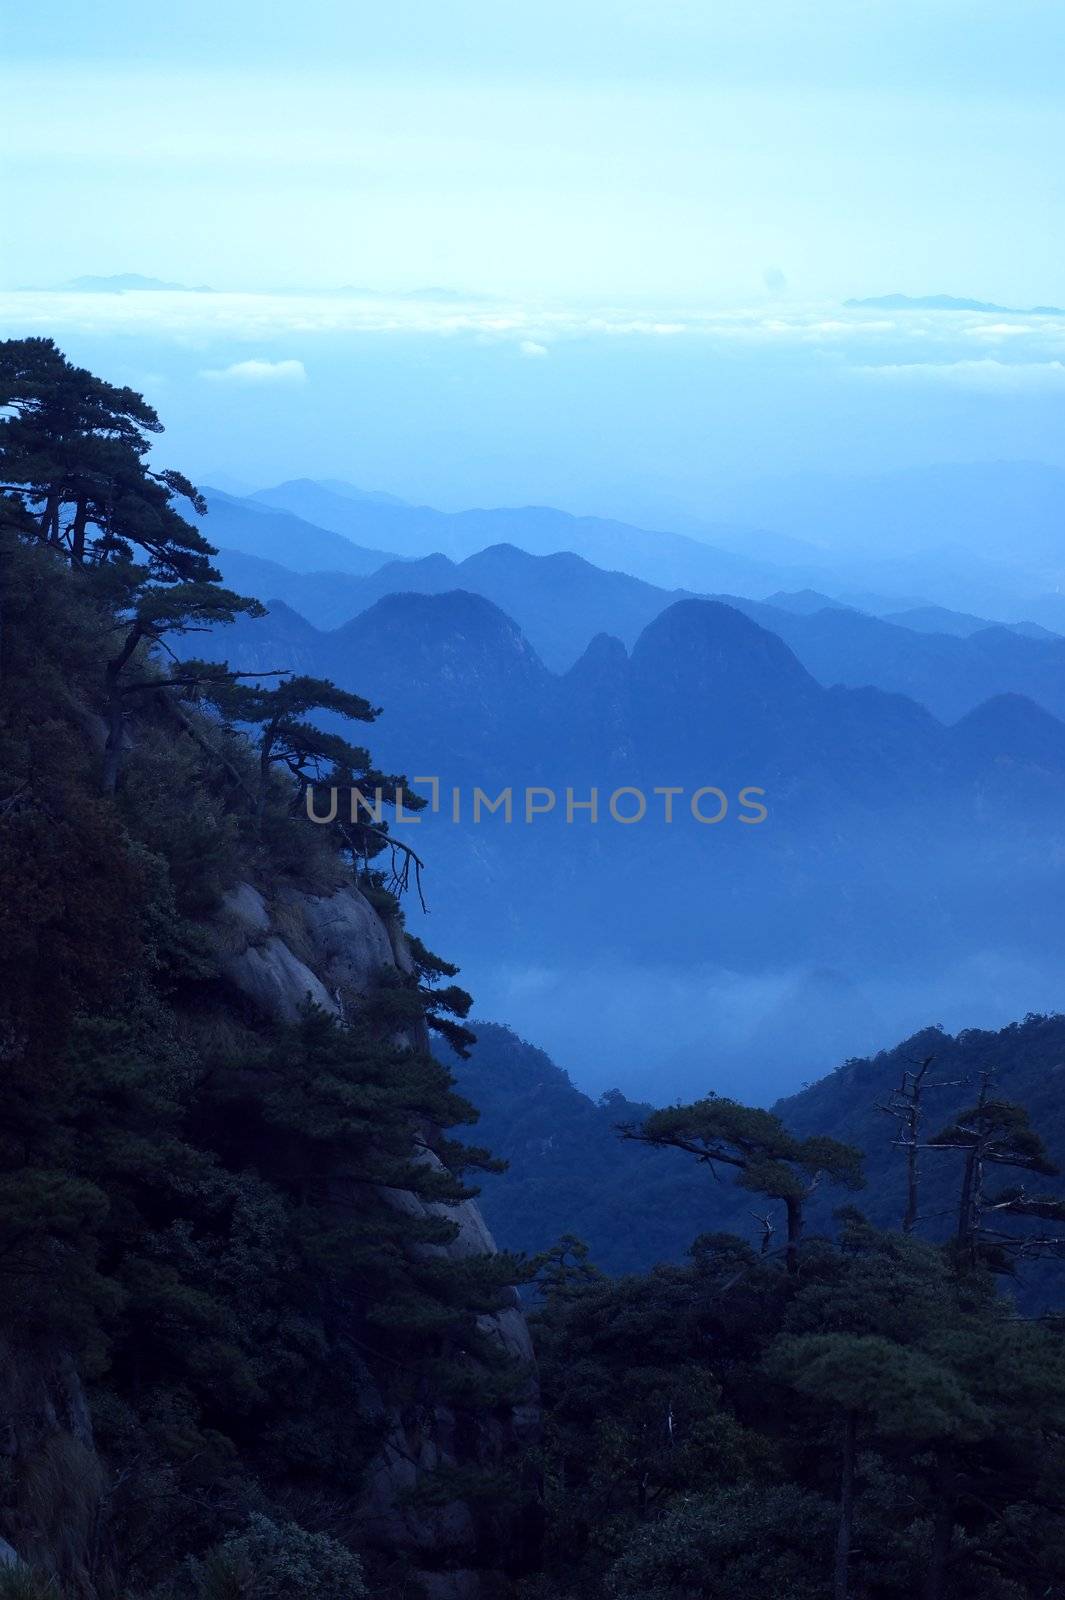 The cloud and mist of Sanqingshan mountain by xfdly5